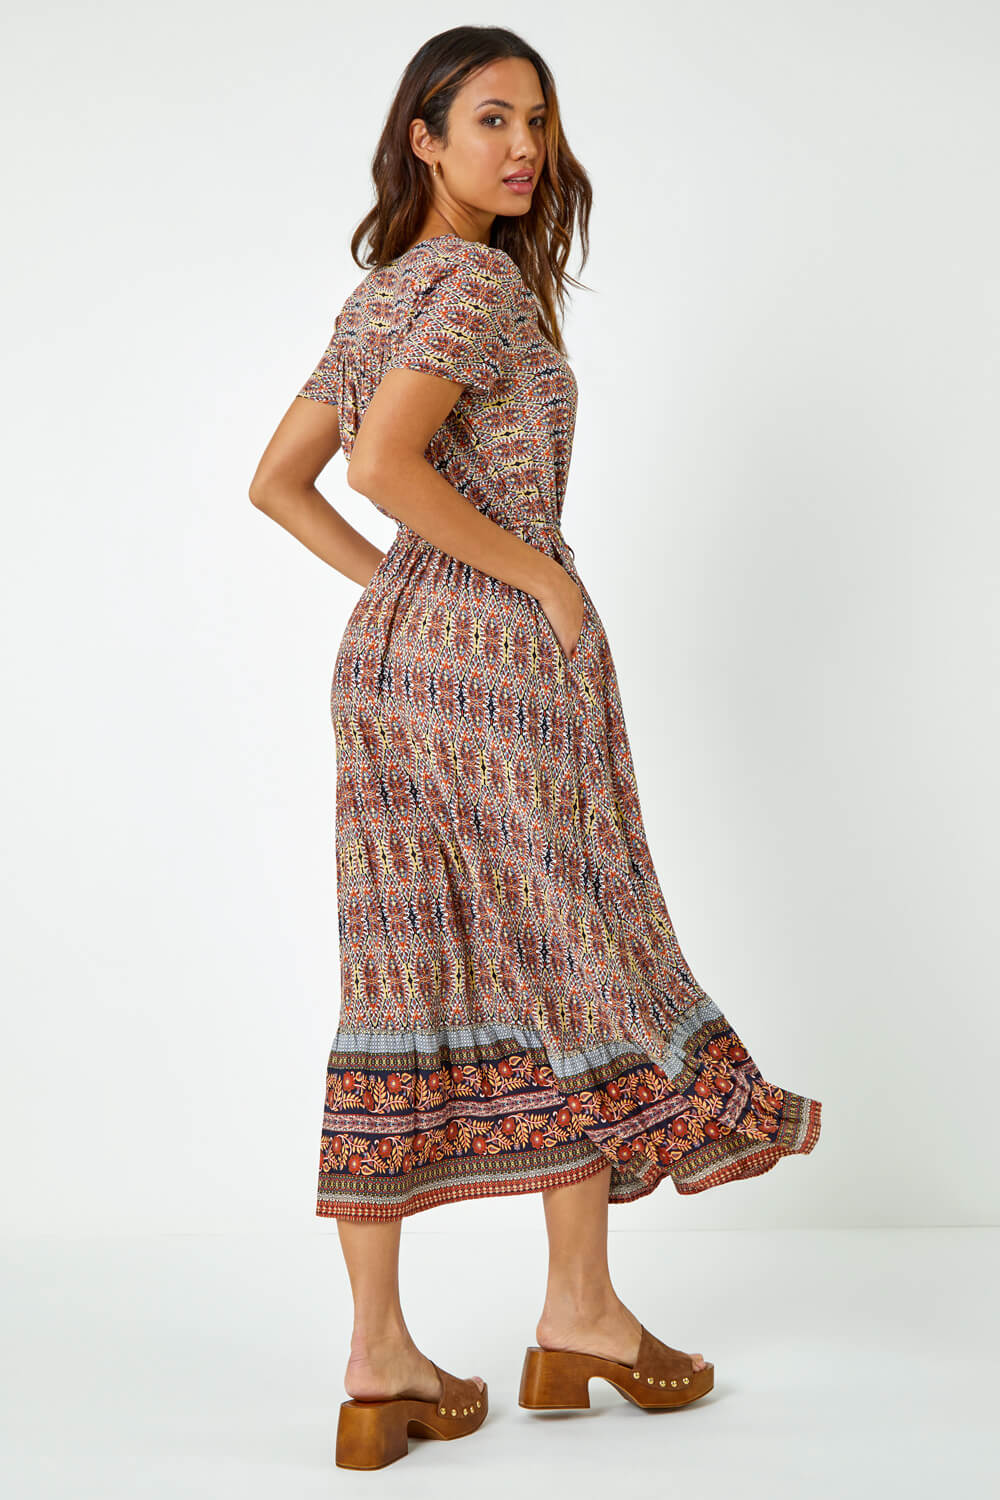 Rust Boho Print Fit and Flare Maxi Dress, Image 3 of 5